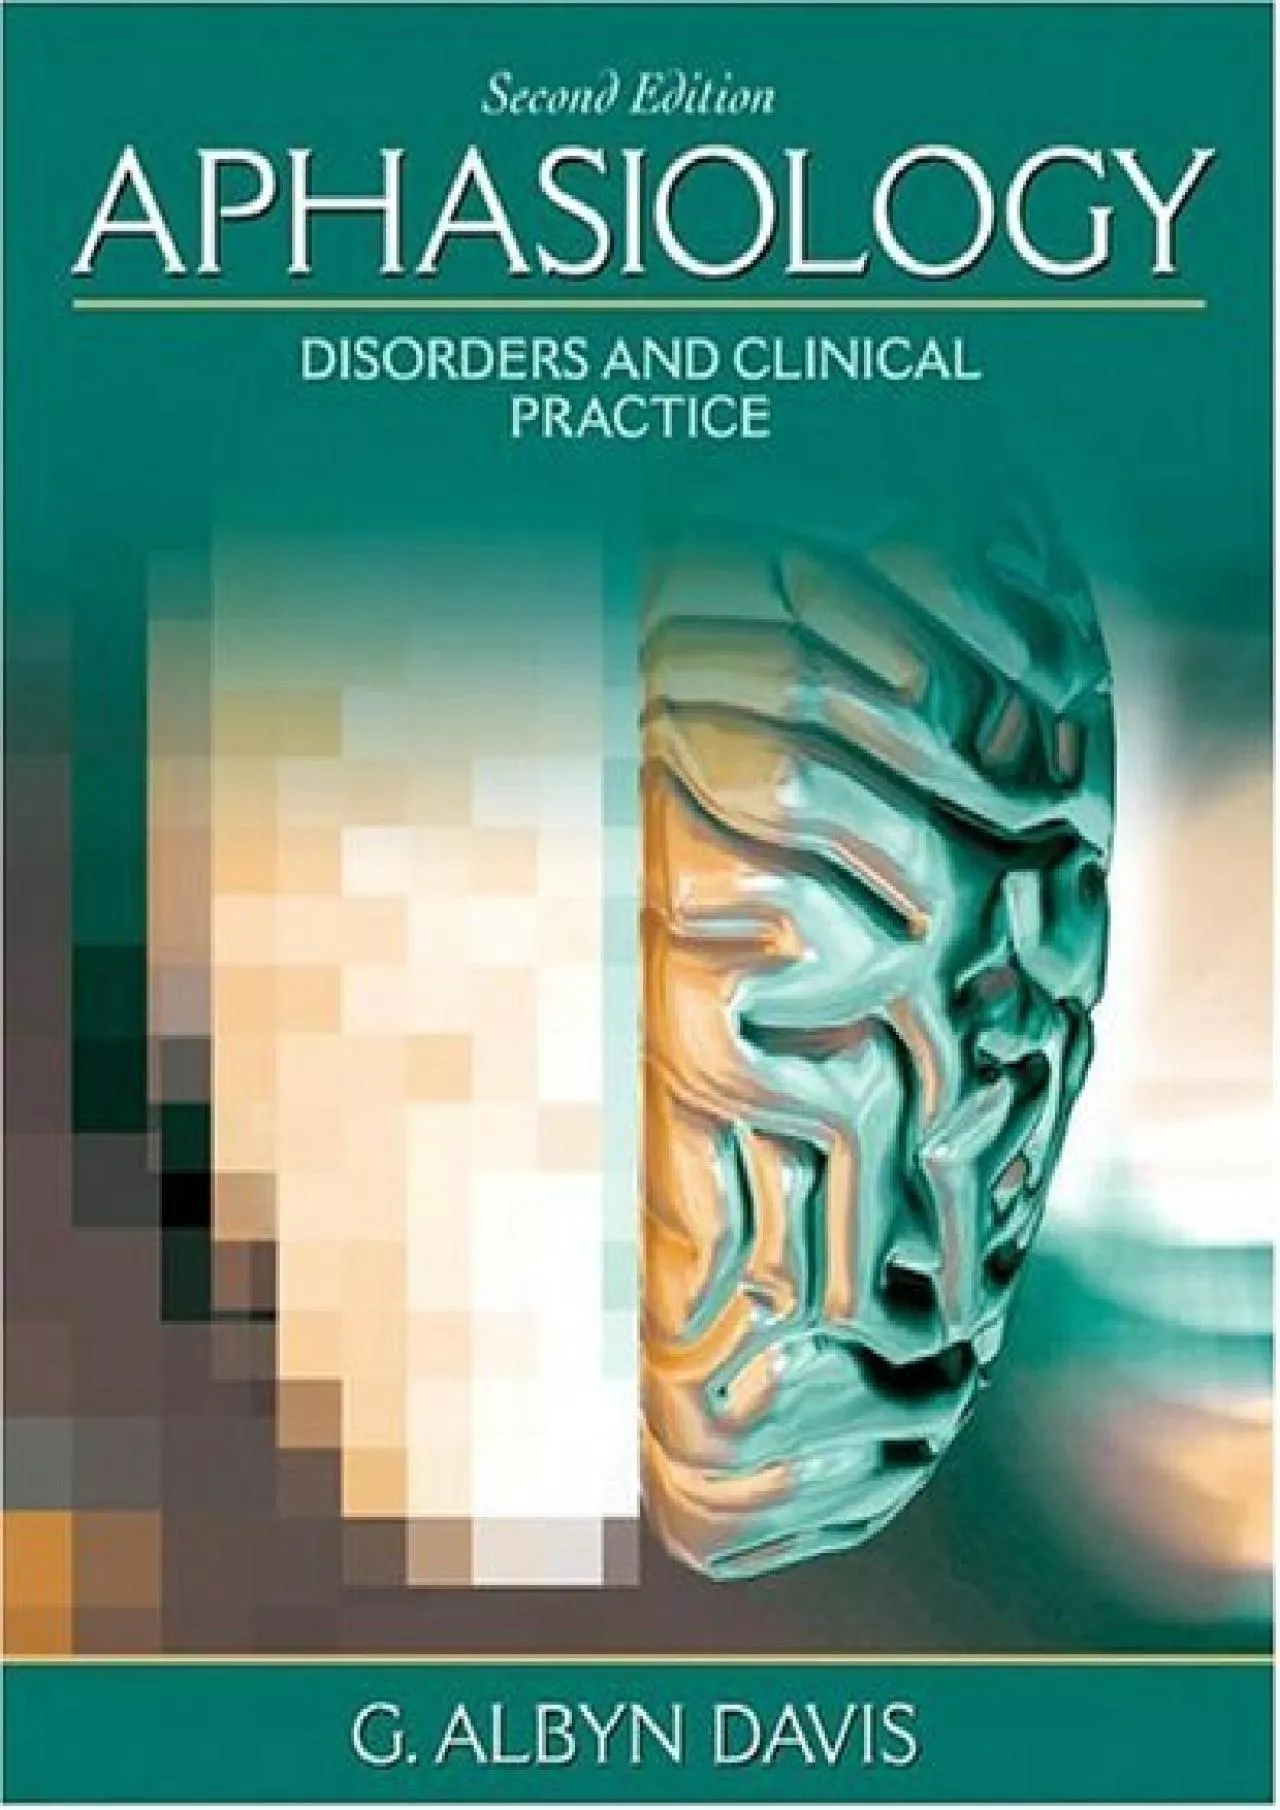 (DOWNLOAD)-Aphasiology: Disorders and Clinical Practice (2nd Edition)